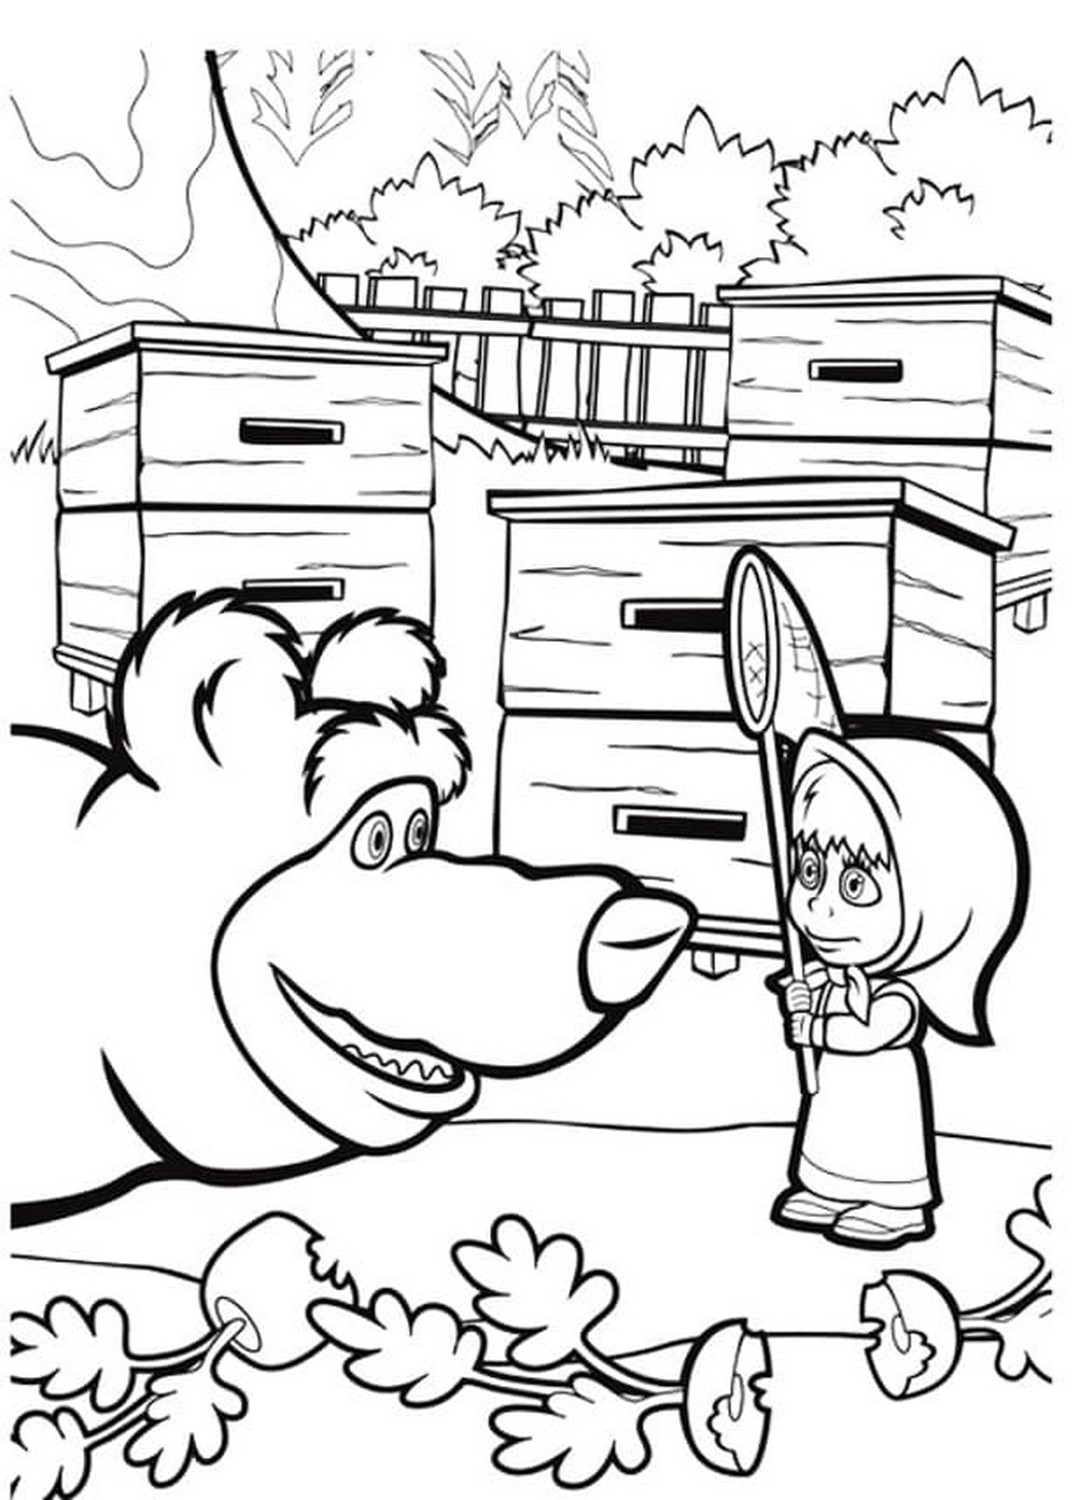 Masha and the Bear 40 drawing from Masha and the Bear to print and color